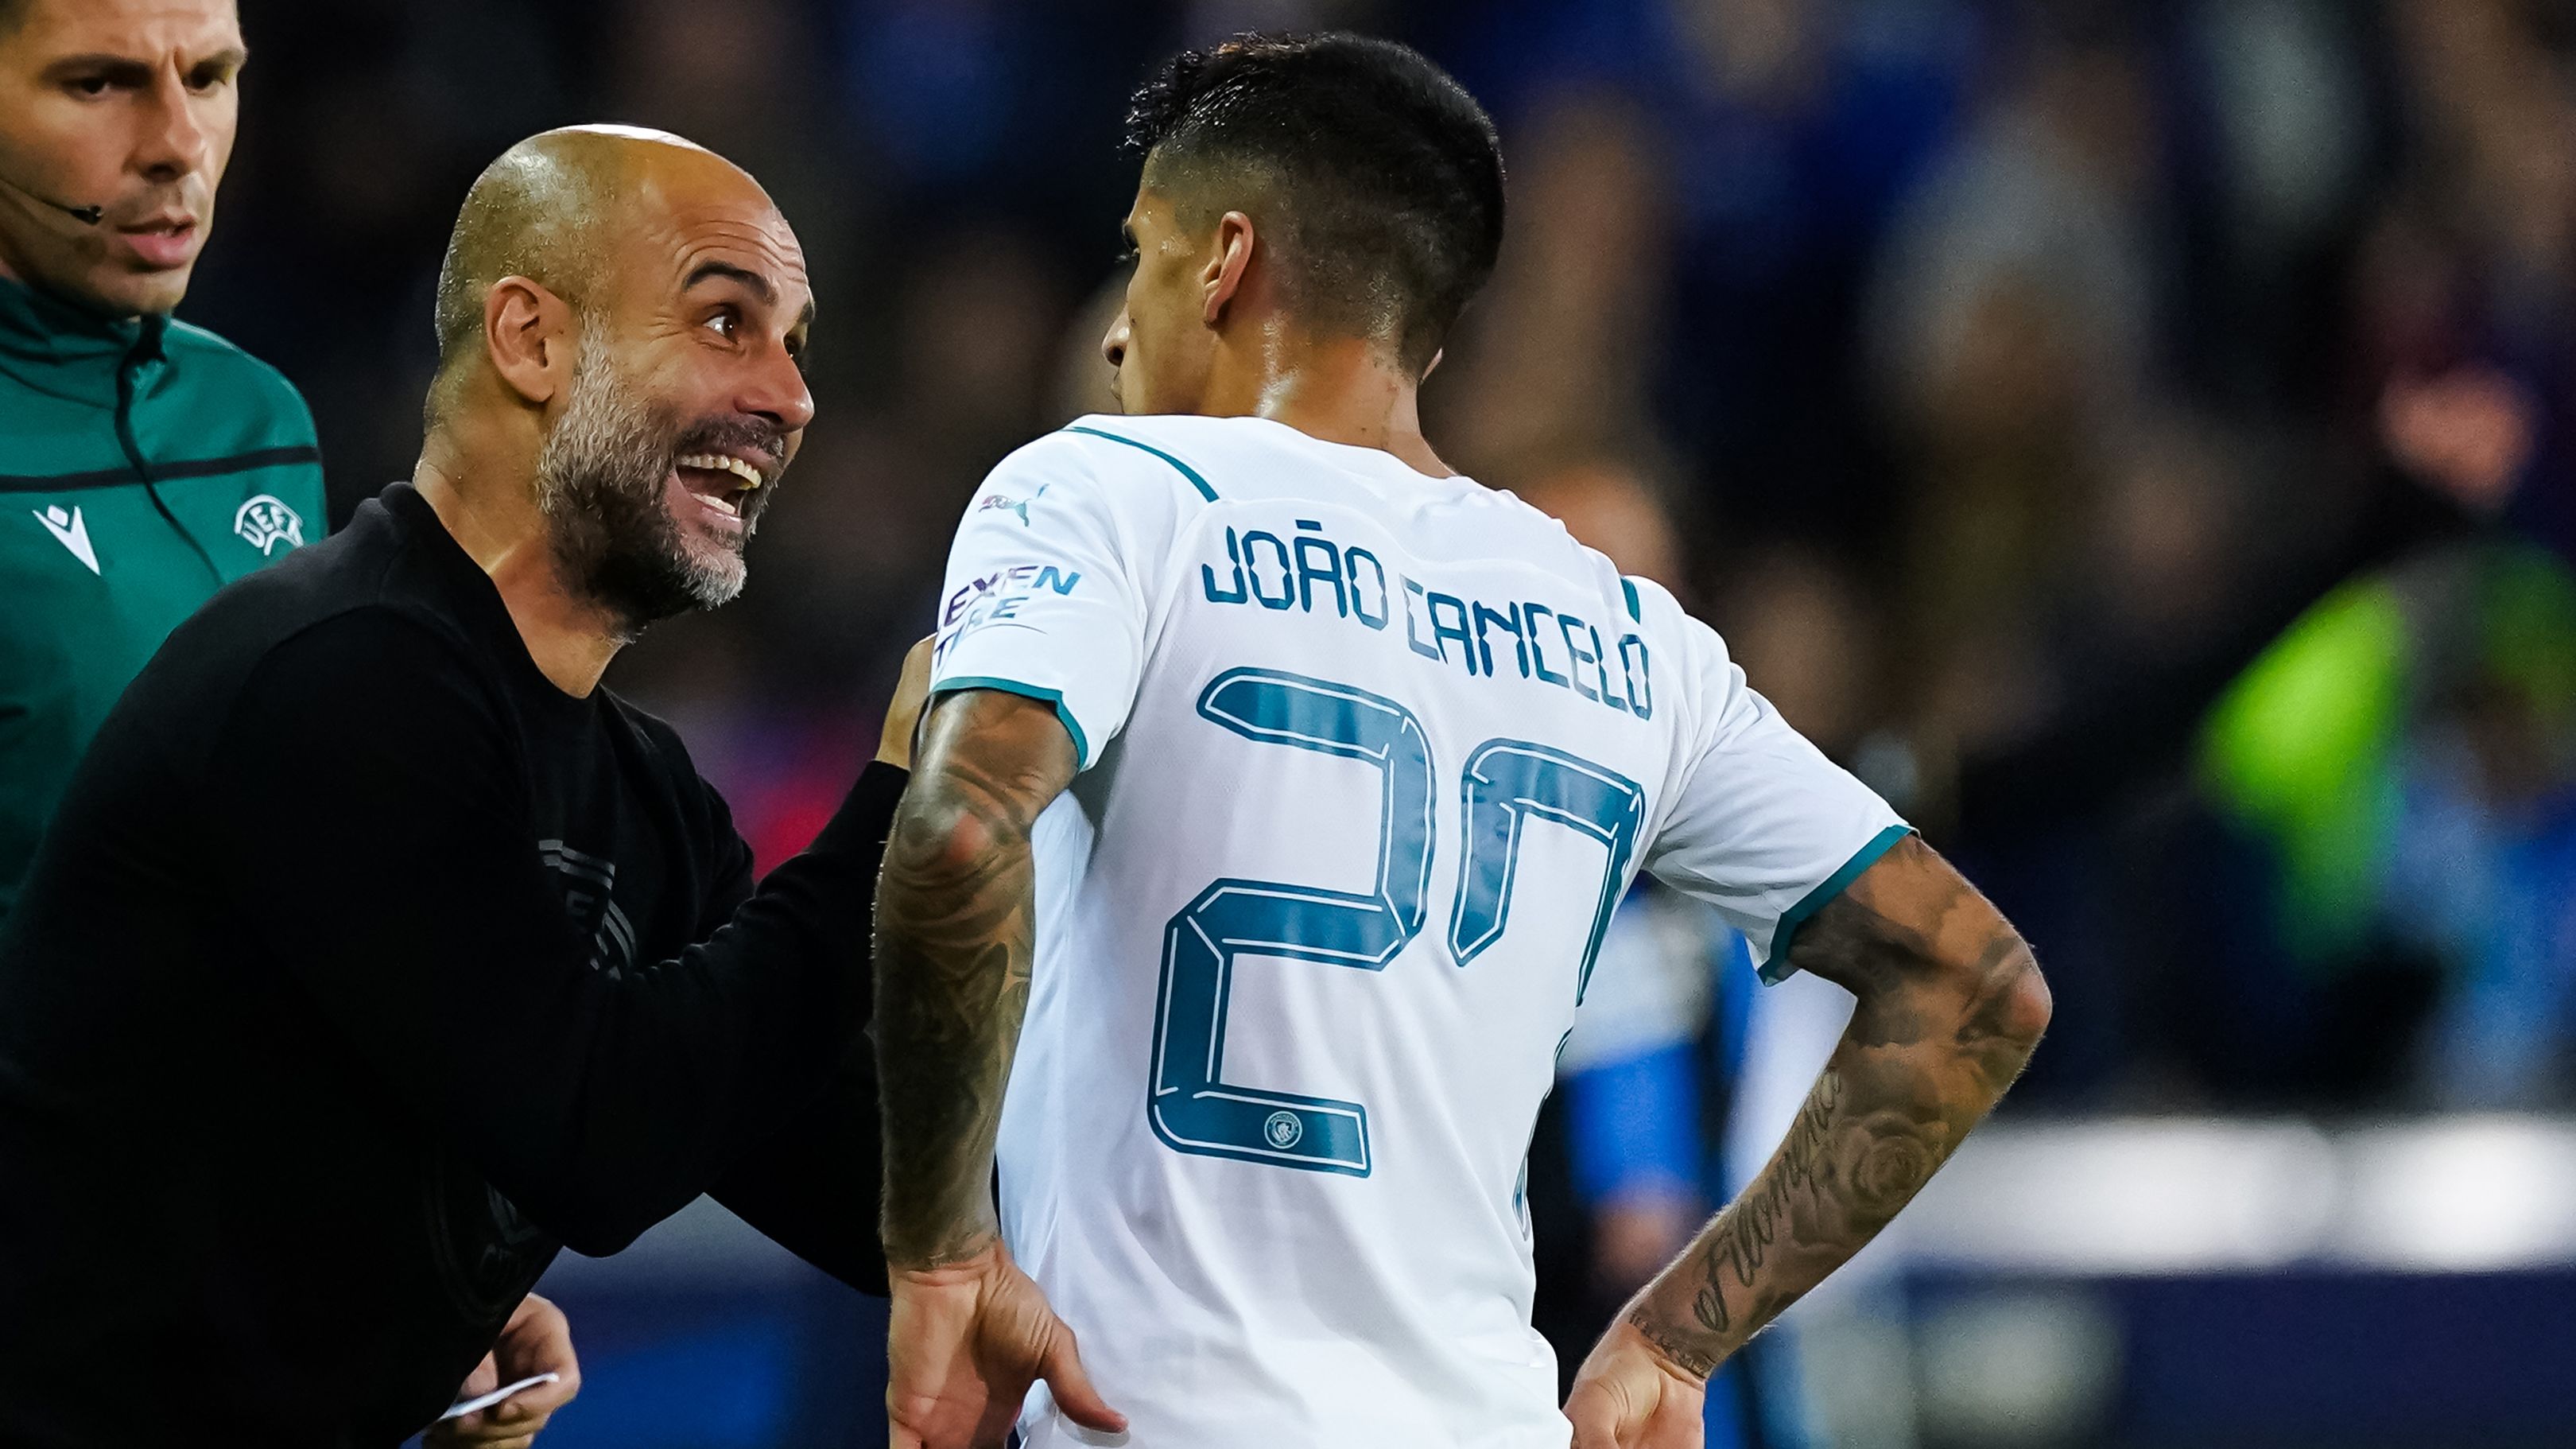  Portugal star Joao Cancelo is set to leave Manchester City on a 108m deal after a reported training ground bust up with manager Pep Guardiola The fullback is believed to have travelled to Bayern Munich ahead of a likely loan move to the German champions who would then have an option to buy him for 108m Cancelo played an integral role for Premier League champions City in recent seasons but has rapidly fallen out of favour with Guardiola since last year s FIFA World Cup in Qatar The 28 year old has started only three of City s nine games since the World Cup with Nathan Ake Kyle Walker and Rico Lewis generally preferred The Daily Mail reported that Cancelo reacted angrily after he learned that he would not be in the starting XI for City s FA Cup clash with Arsenal last weekend Cancelo has been vocal in recent weeks at a lack of game time and has become disruptive to the squad while his relationship with Guardiola progressively deteriorated after the World Cup the British newspaper stated The 28 year old Portugal international threatened to leave the club and such was the severity of the situation City gave Cancelo the green light to depart once he brought a loan offer from Bayern to the table with the relationship between player and manager beyond repair Neither City nor Bayern have commented officially on any deal for Cancelo The European transfer window closes on Tuesday Credit https wwos nine com au football transfer news 2023 manchester city star joao cancelo set to join bayern munich d04277ce 5b2f 455d 9a4d 6d97a929813b 